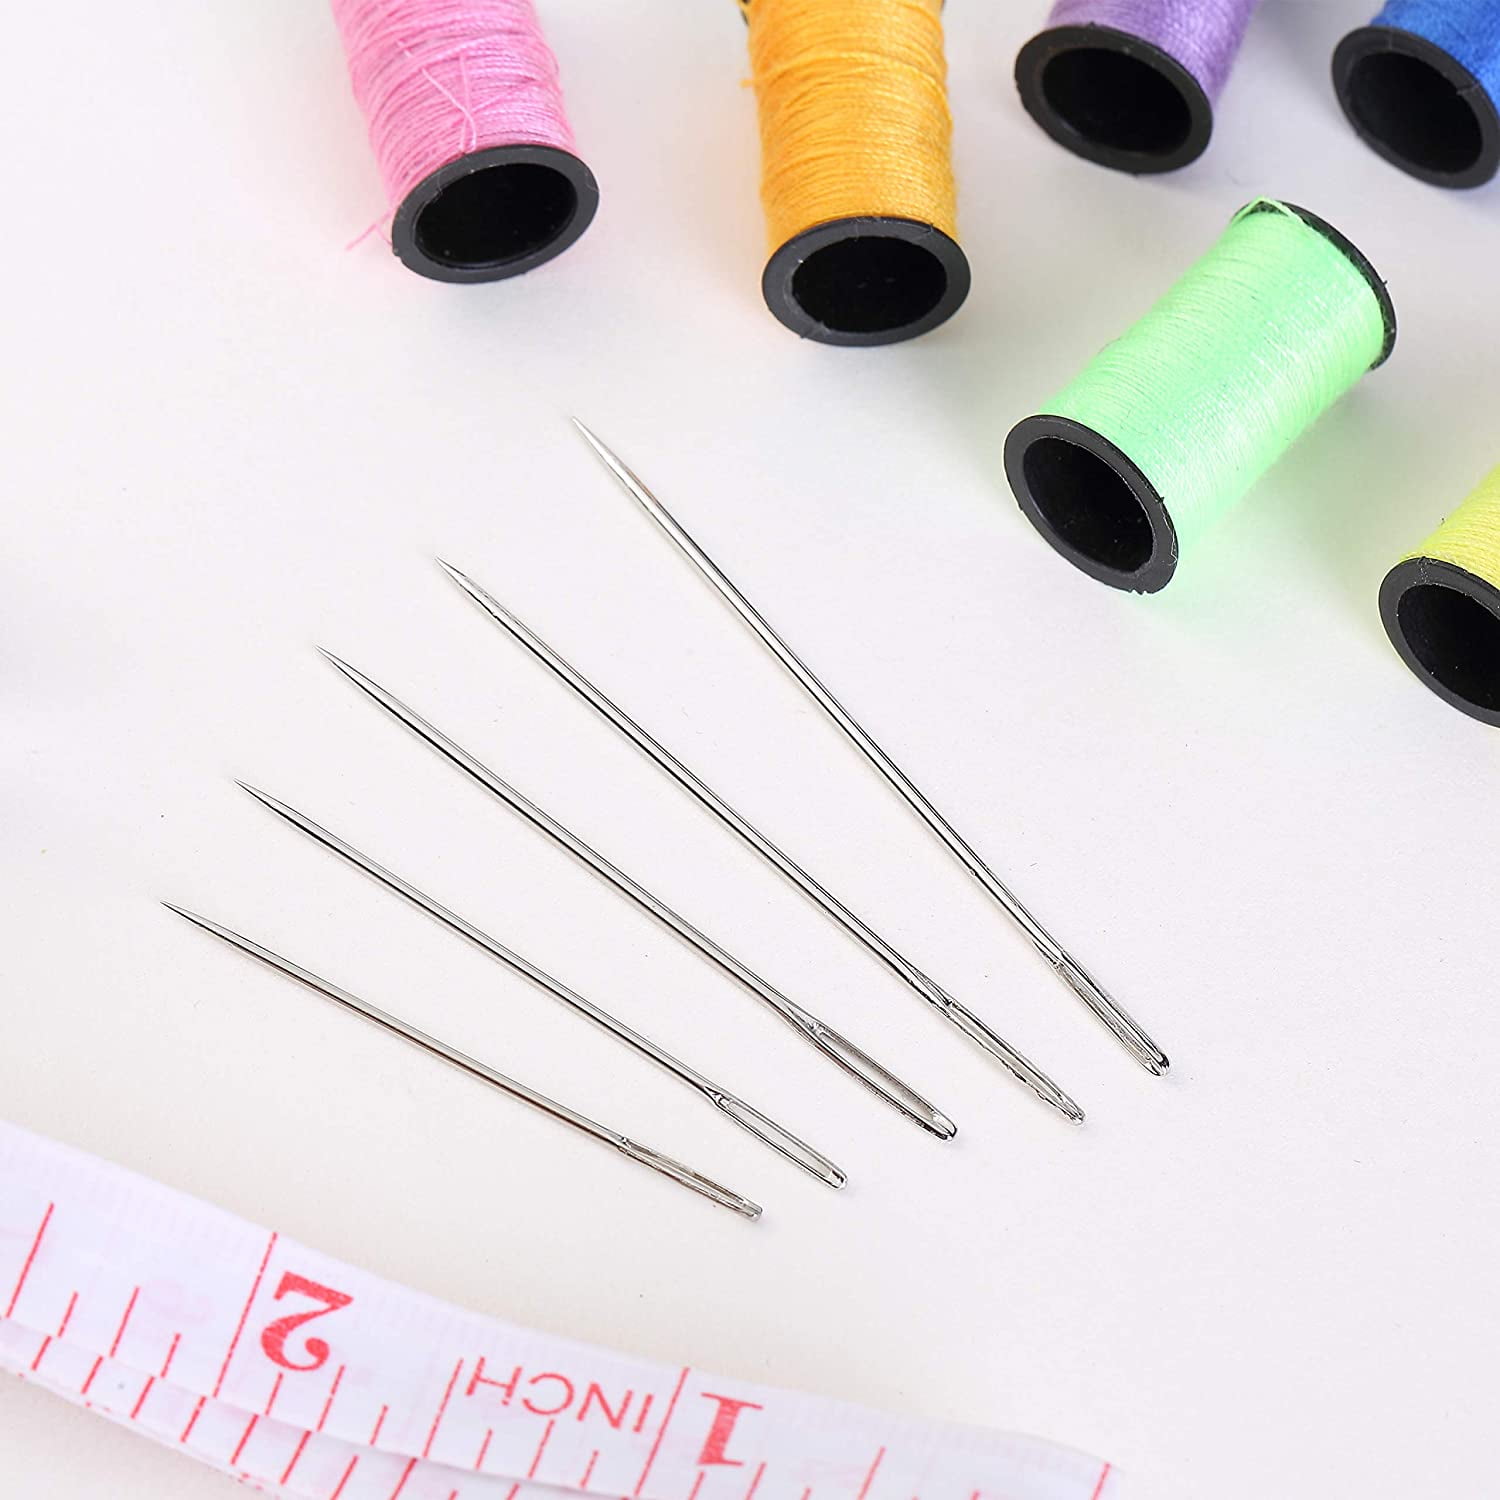 Beading Hand Sewing Needles - Wholesale Prices on Safety Pins by Strang  Advance